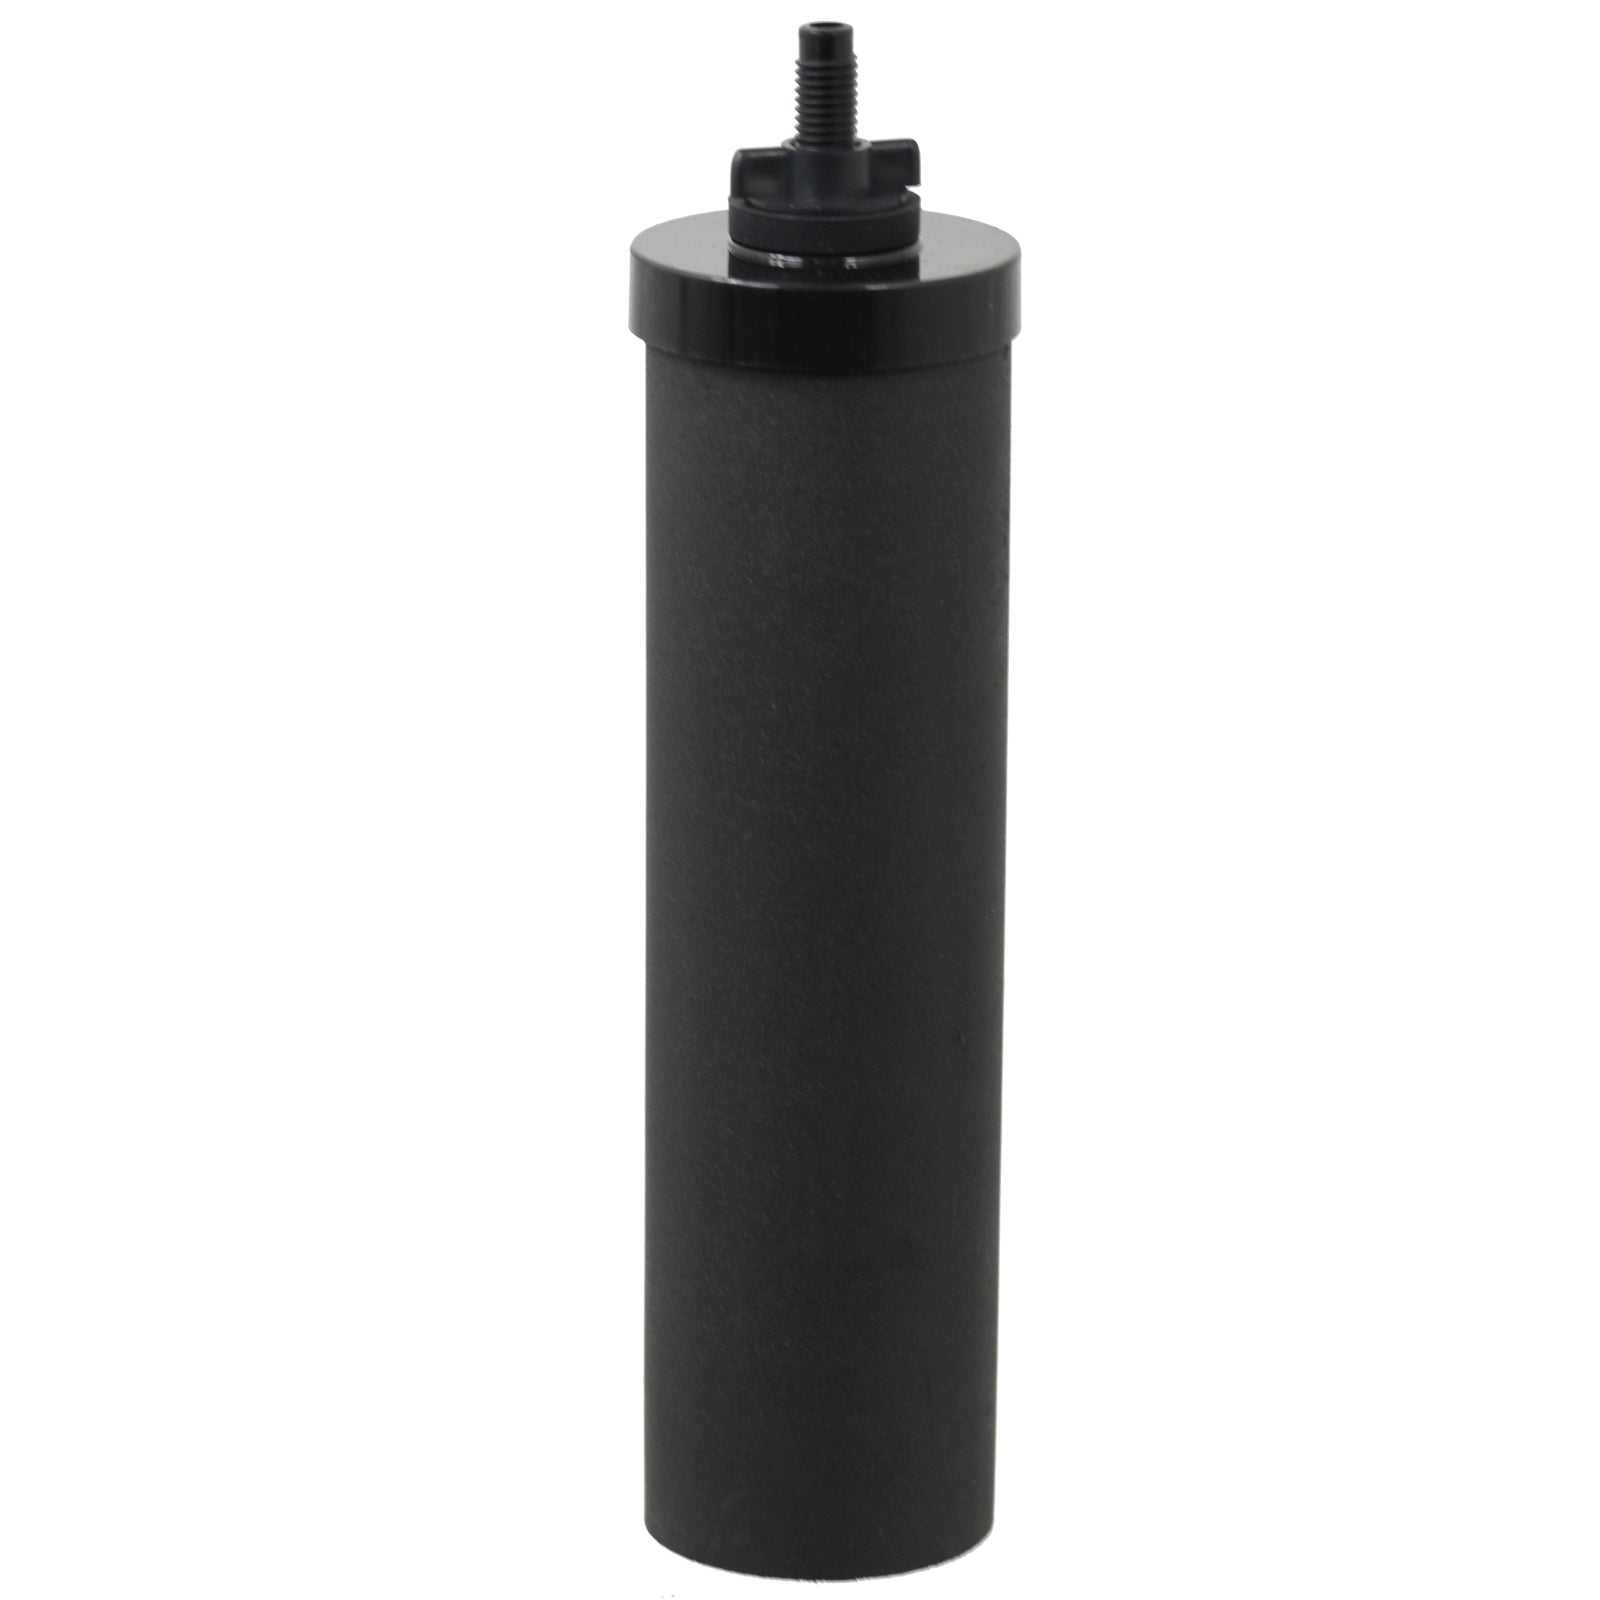 Water Filter Element for Berkey Purification System Cartridge Filters Black x 4